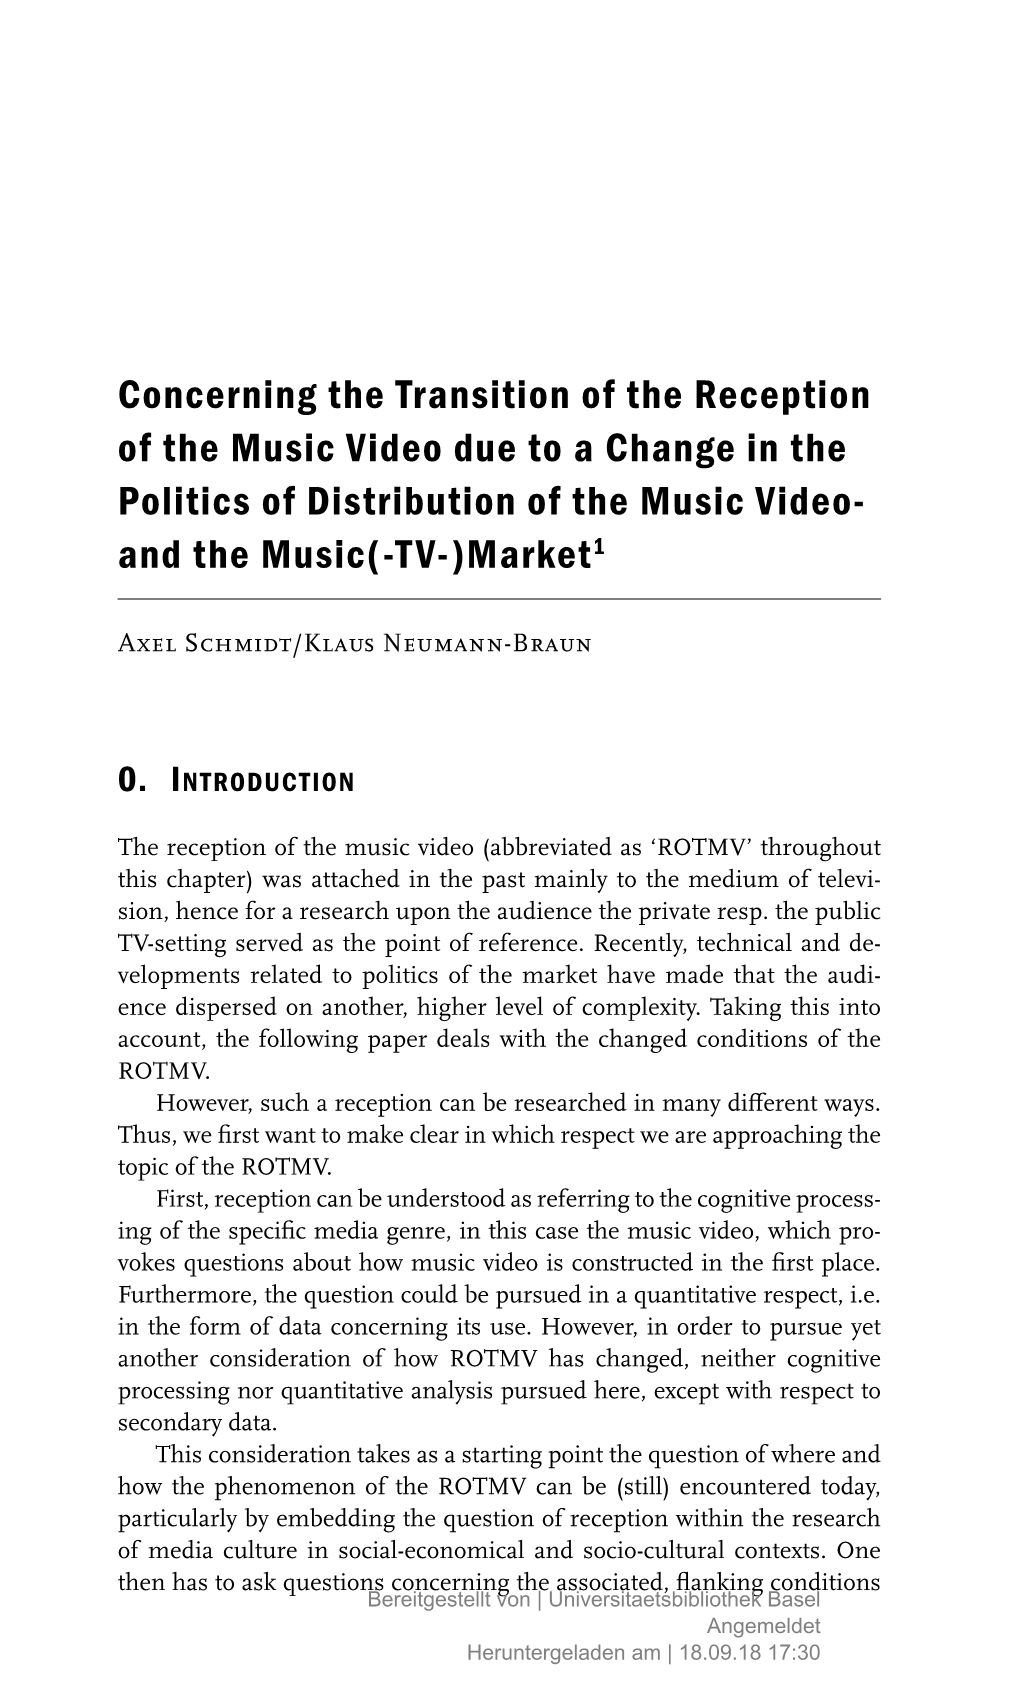 Concerning the Transition of the Reception of the Music Video Due to a Change in the Politics of Distribution of the Music Video- and the Music(-TV-)Market1